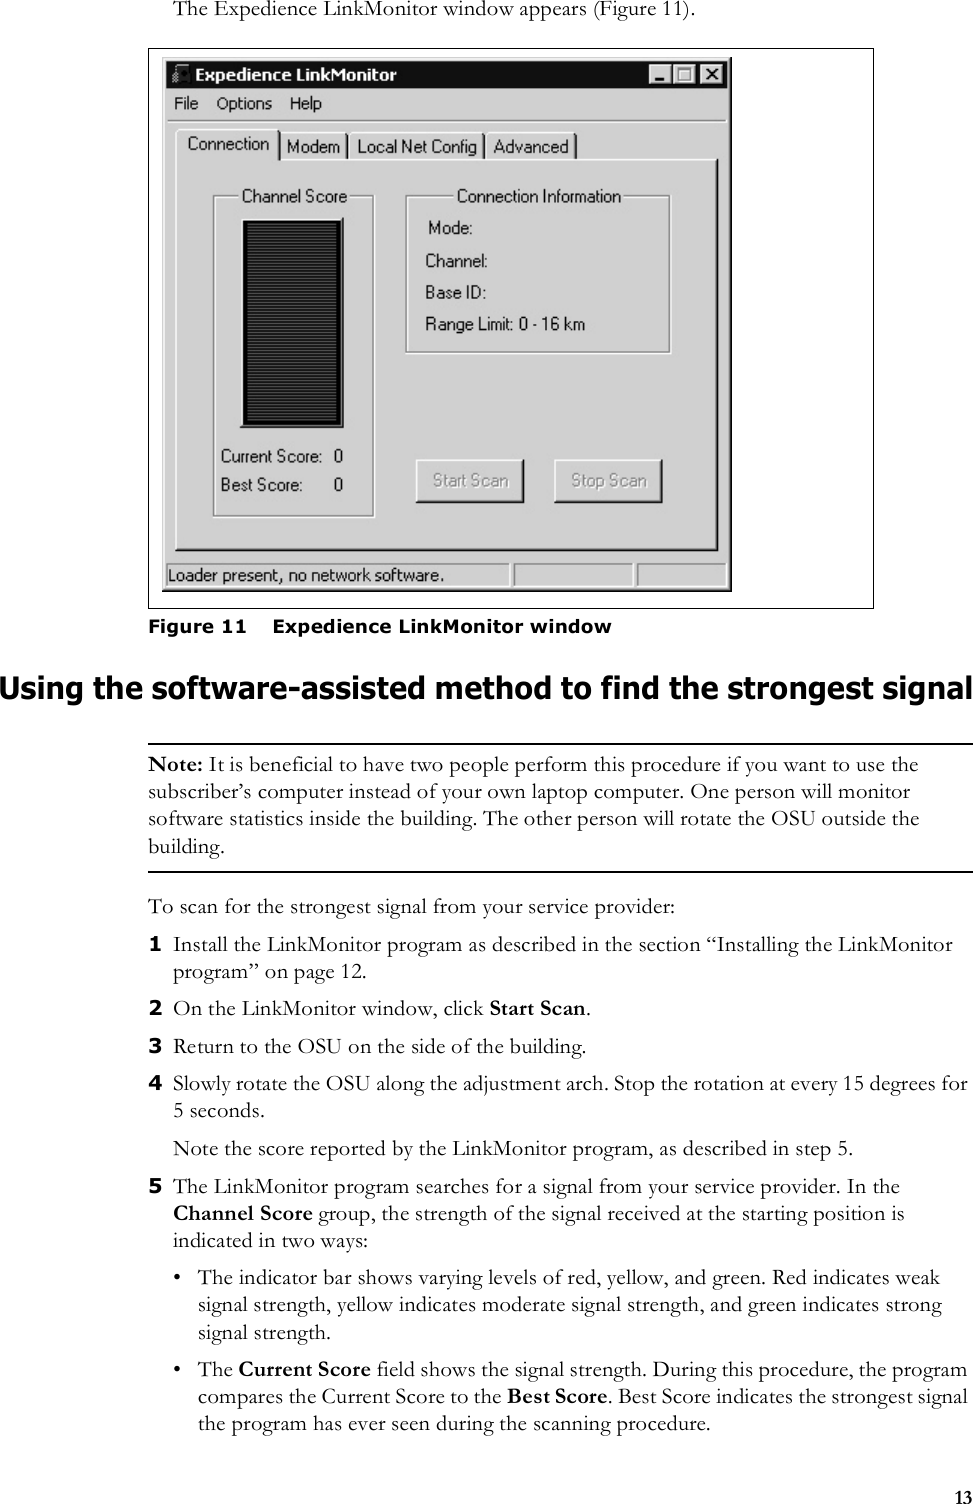 13The Expedience LinkMonitor window appears (Figure 11).Using the software-assisted method to find the strongest signalNote: It is beneficial to have two people perform this procedure if you want to use the subscriber’s computer instead of your own laptop computer. One person will monitor software statistics inside the building. The other person will rotate the OSU outside the building.To scan for the strongest signal from your service provider:1Install the LinkMonitor program as described in the section “Installing the LinkMonitor program” on page 12. 2On the LinkMonitor window, click Start Scan. 3Return to the OSU on the side of the building. 4Slowly rotate the OSU along the adjustment arch. Stop the rotation at every 15 degrees for 5 seconds. Note the score reported by the LinkMonitor program, as described in step 5. 5The LinkMonitor program searches for a signal from your service provider. In the Channel Score group, the strength of the signal received at the starting position is indicated in two ways:• The indicator bar shows varying levels of red, yellow, and green. Red indicates weak signal strength, yellow indicates moderate signal strength, and green indicates strong signal strength.•The Current Score field shows the signal strength. During this procedure, the program compares the Current Score to the Best Score. Best Score indicates the strongest signal the program has ever seen during the scanning procedure.Figure 11 Expedience LinkMonitor window